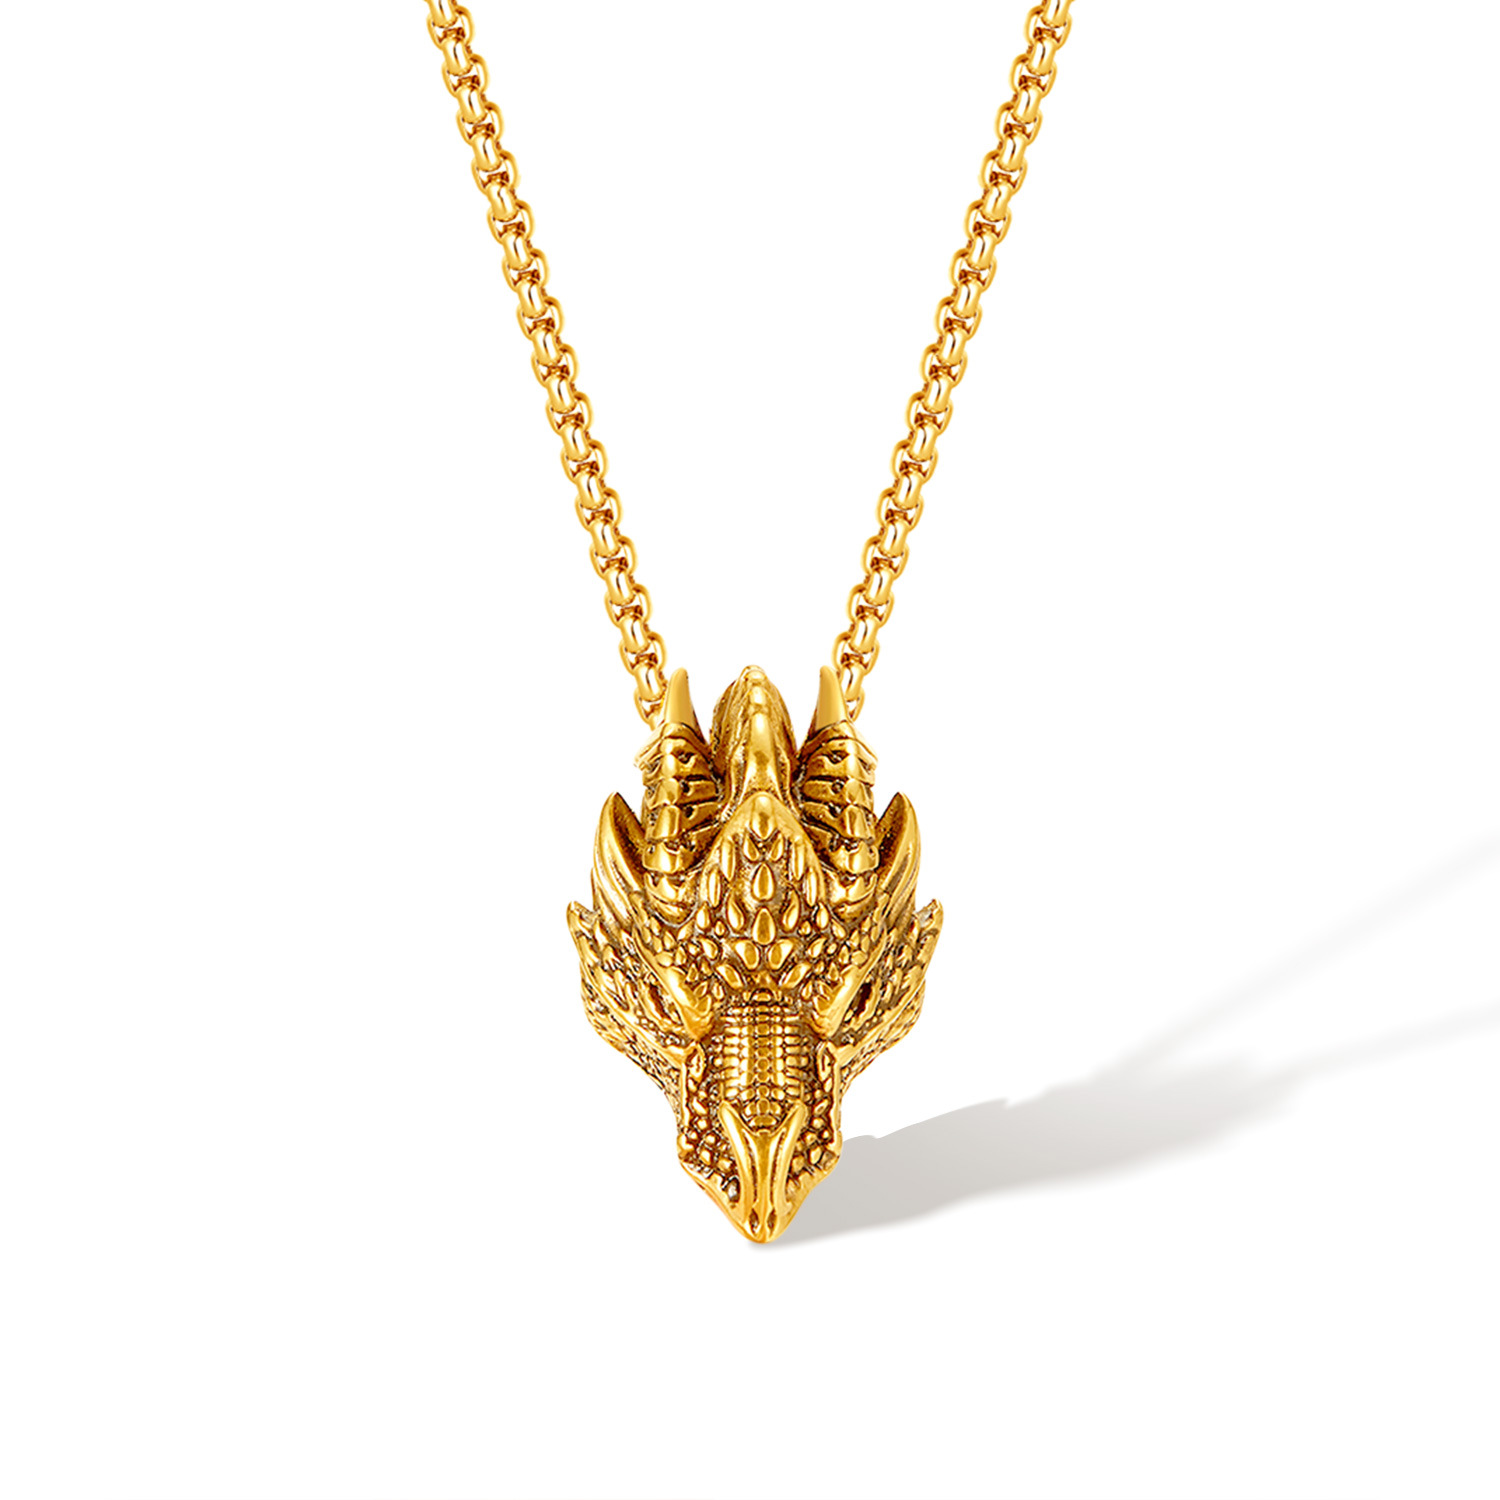 Gold pendant with chain 3x55cm